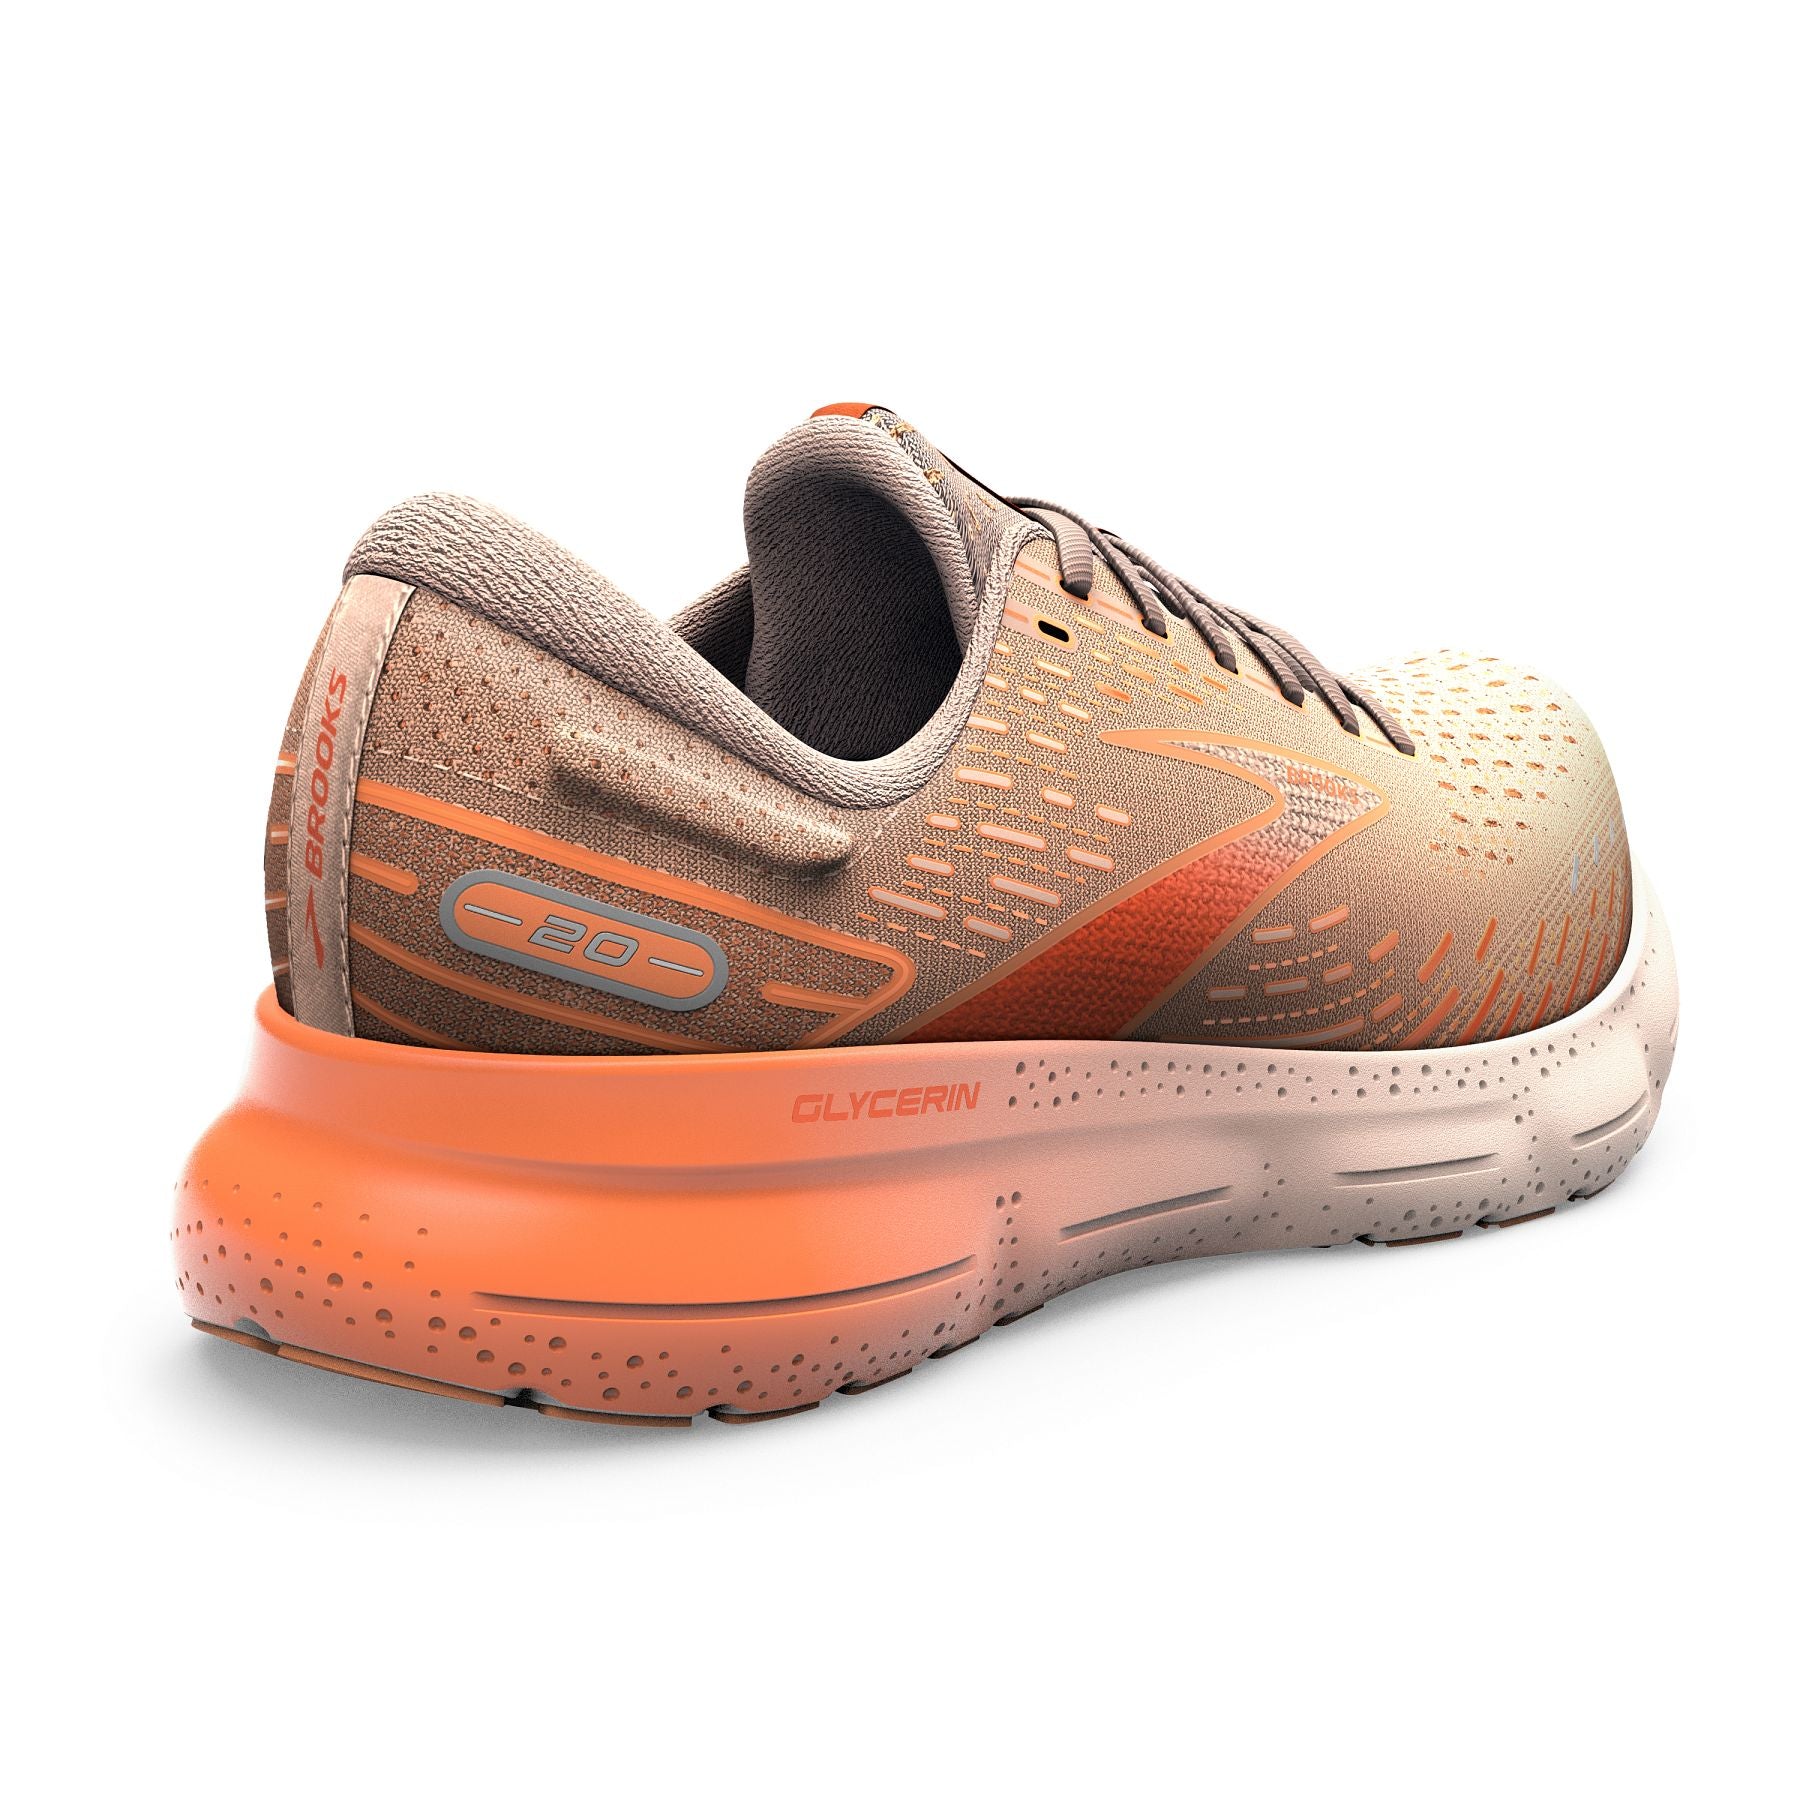 Back angle view of the Women's Glycerin 20 by Brook's in the color Peach/Tangerine/Orange